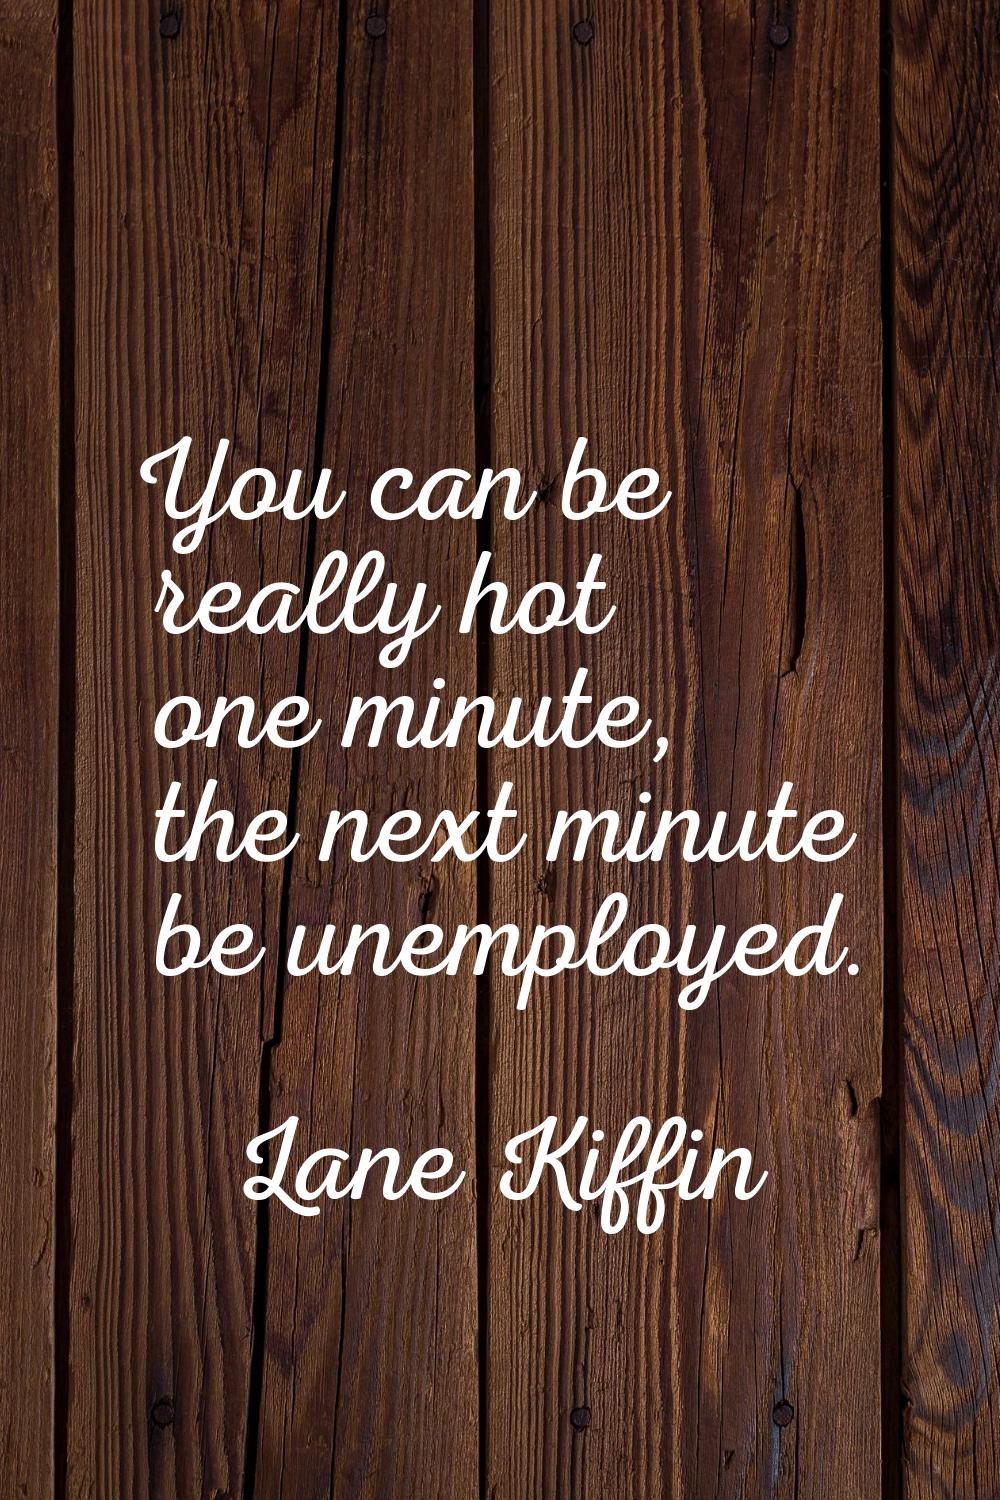 You can be really hot one minute, the next minute be unemployed.